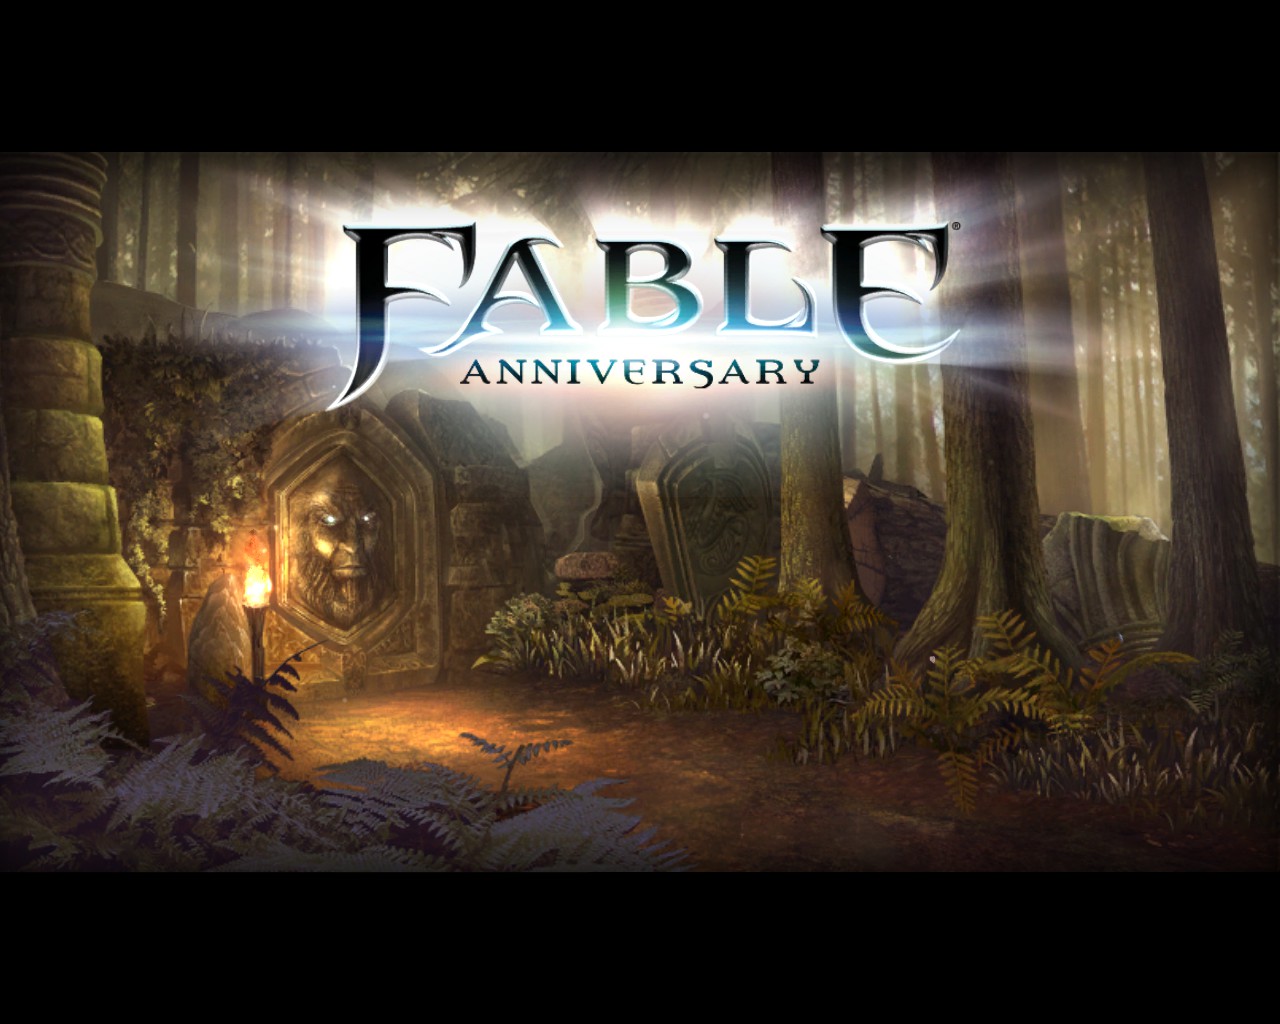 fable anniversary cheats and exploits pc steam